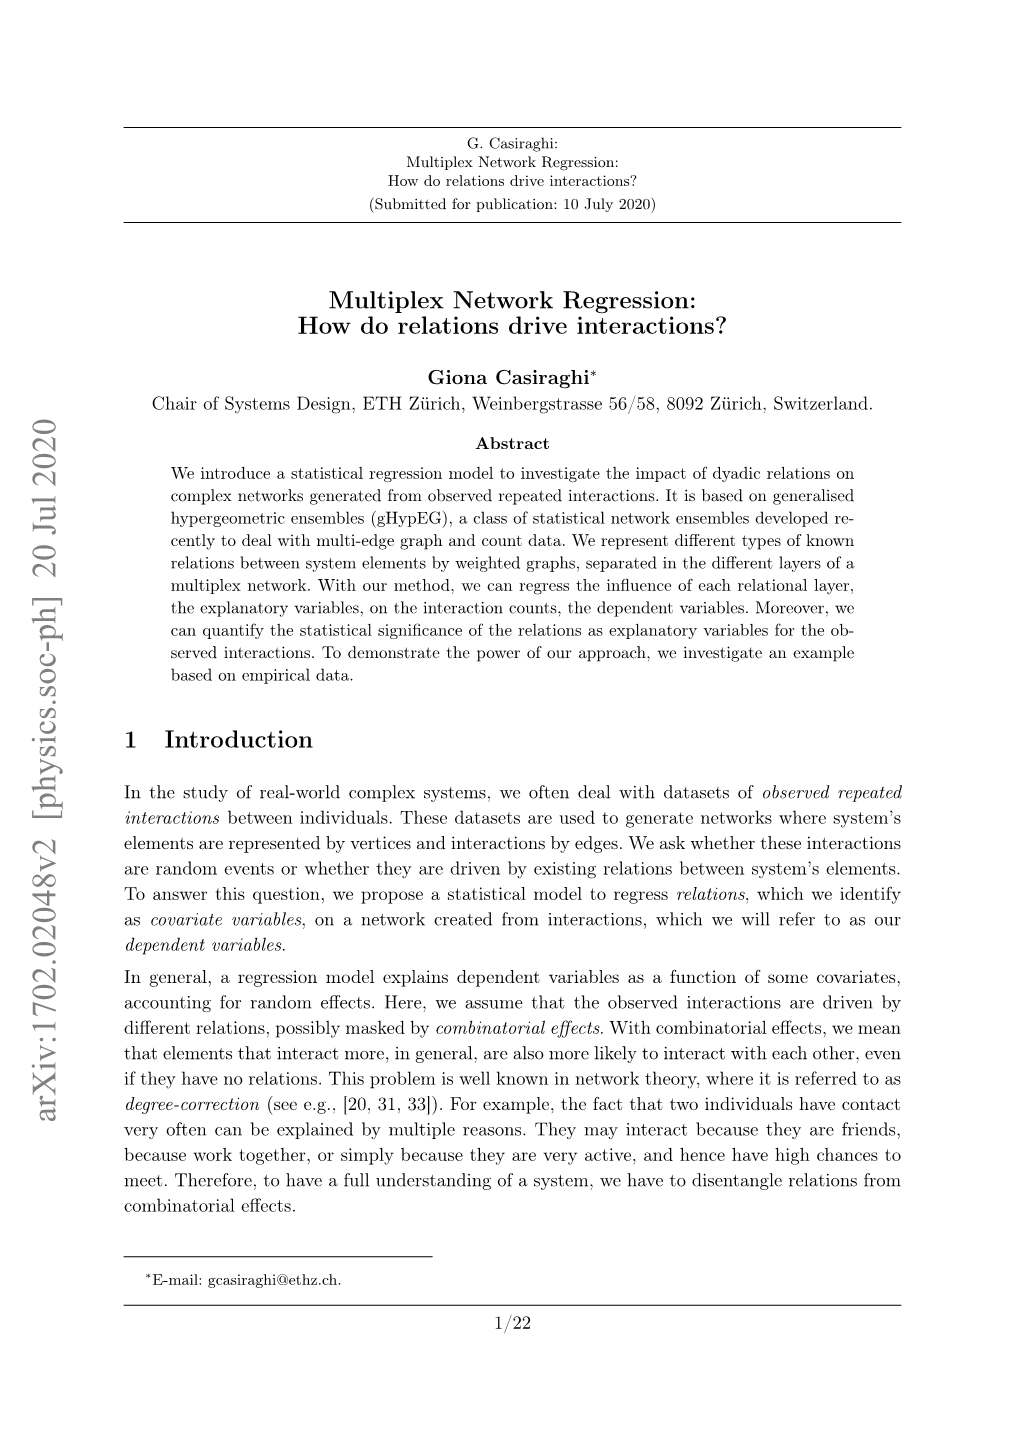 Multiplex Network Regression: How Do Relations Drive Interactions? (Submitted for Publication: 10 July 2020)